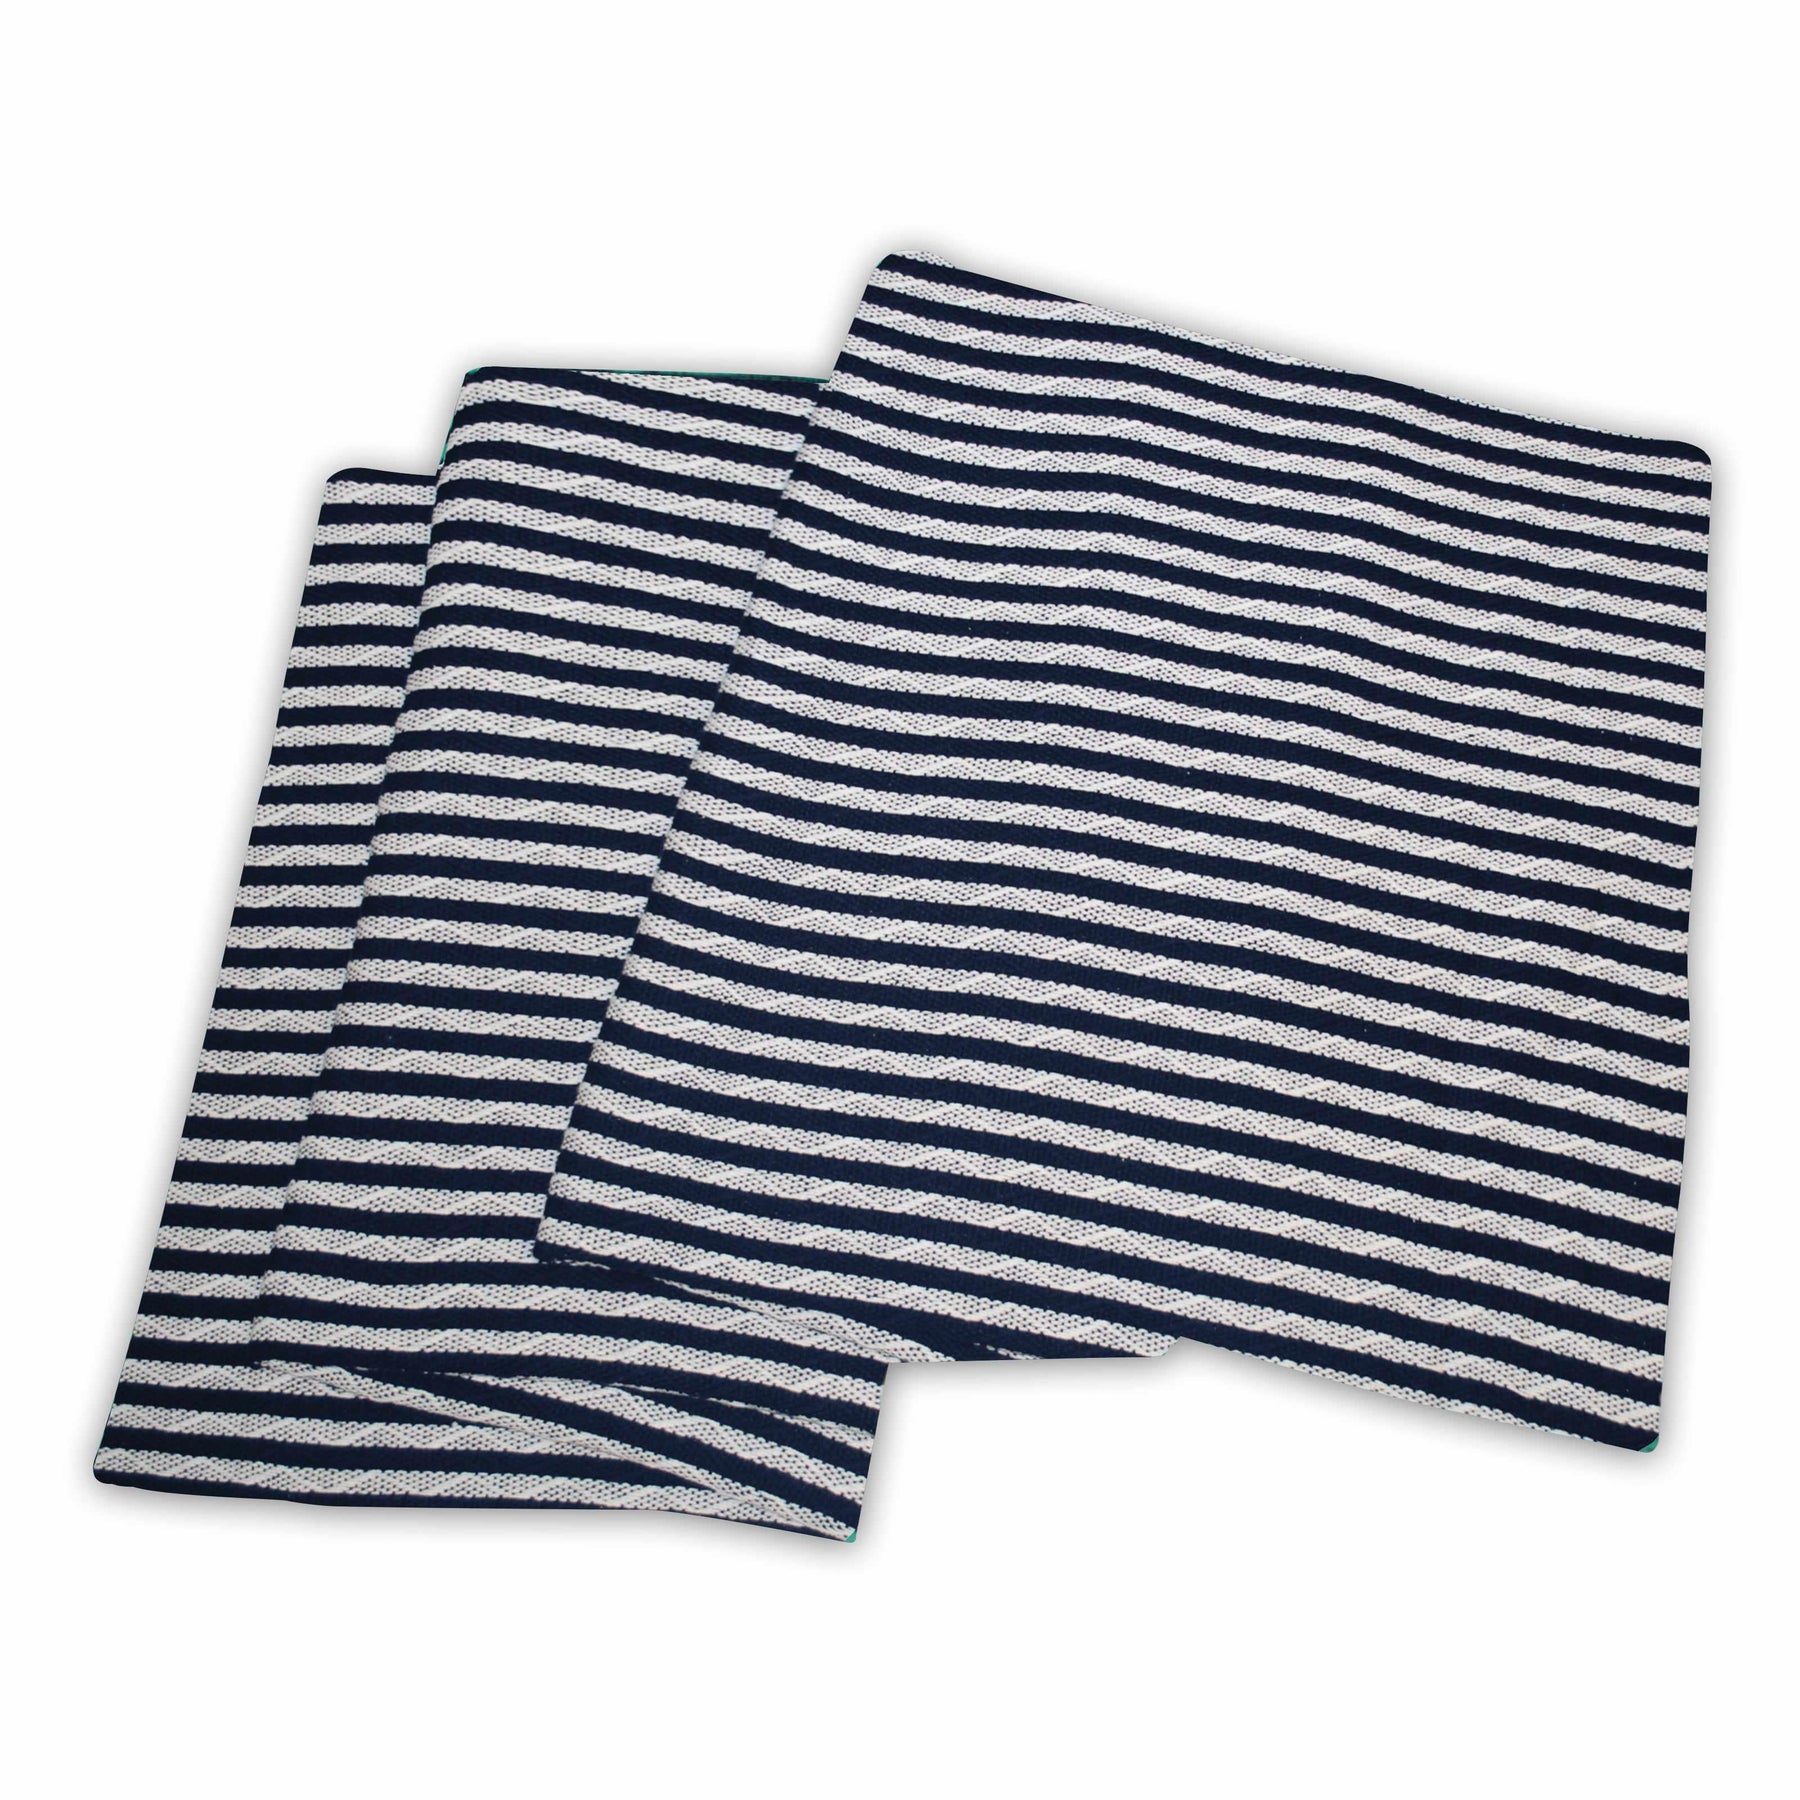 Superior Striped All Season Long-Staple Combed Cotton Woven Blanket - Navy Blue/White